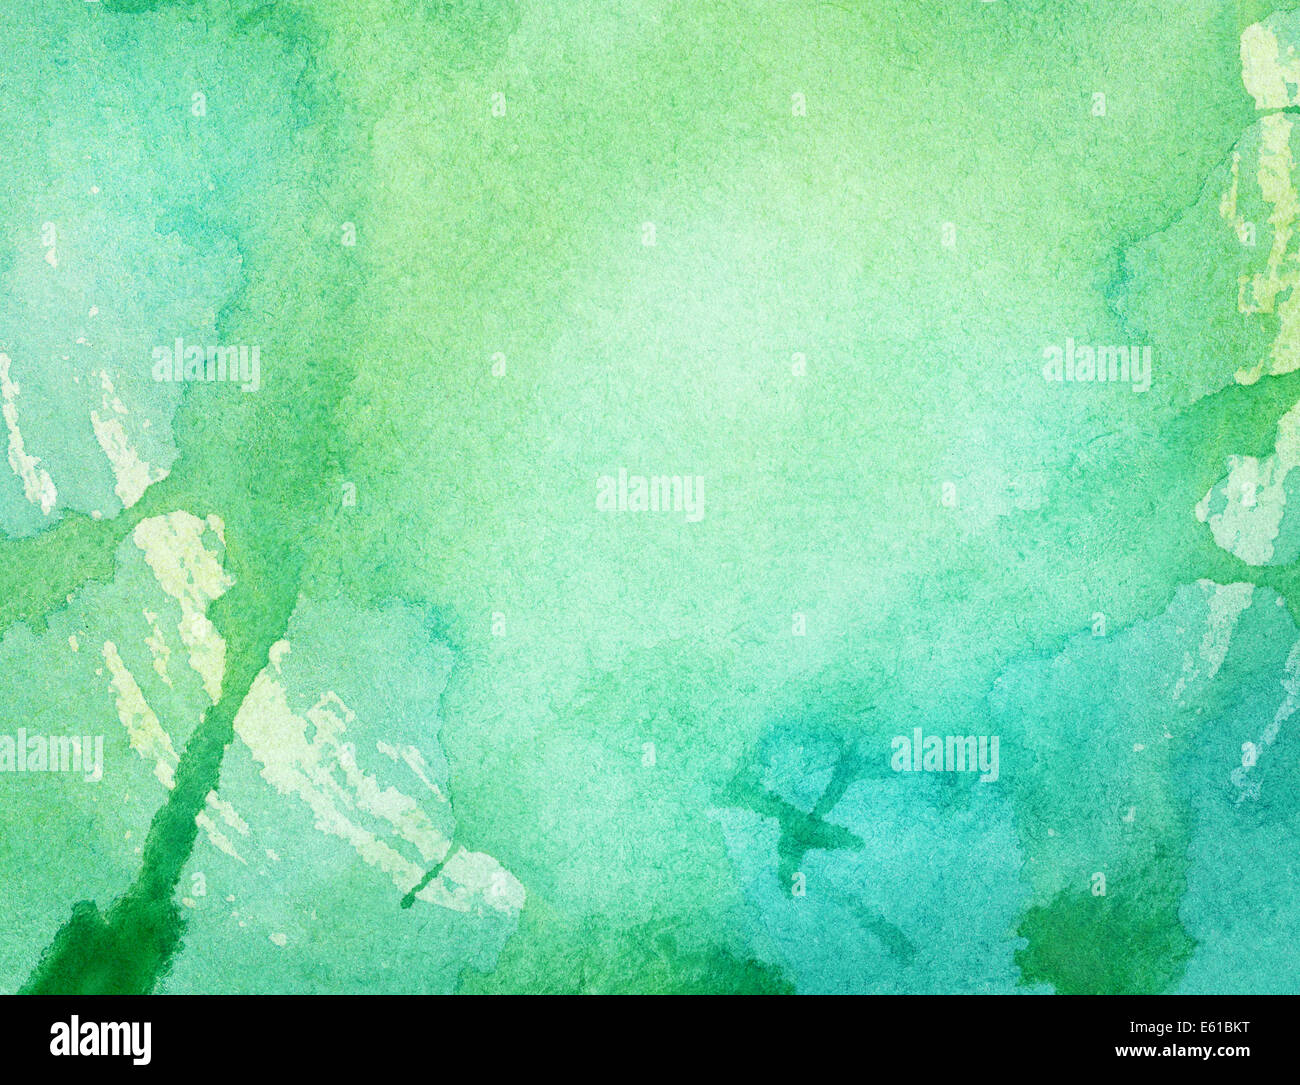 Watercolor grunge background Stock Photo